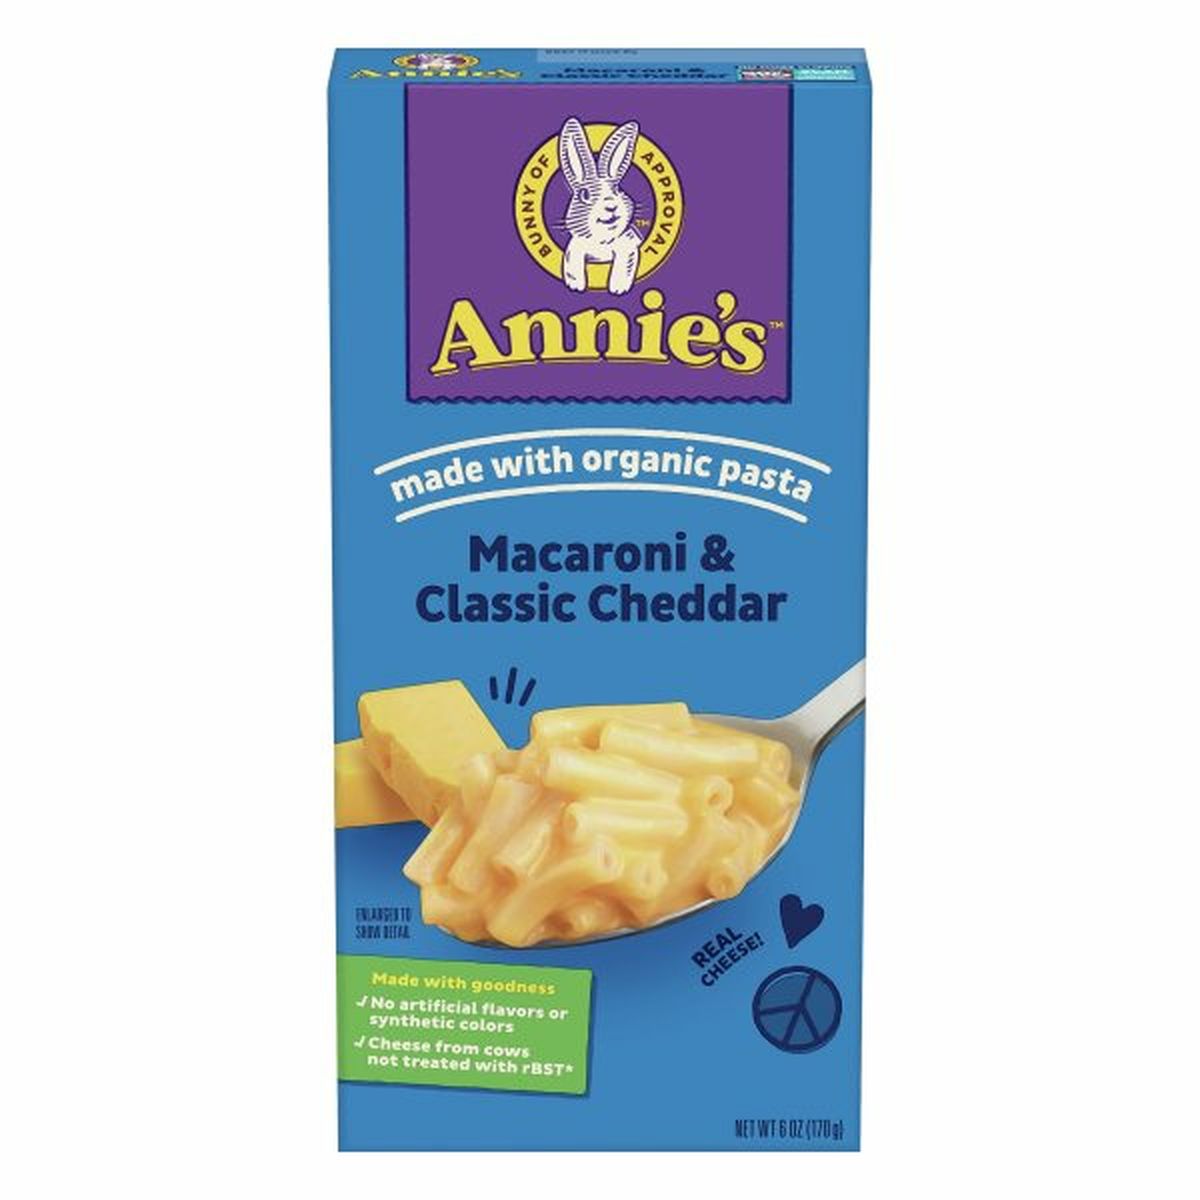 Calories in Annie's Macaroni & Cheese, Classic Cheddar